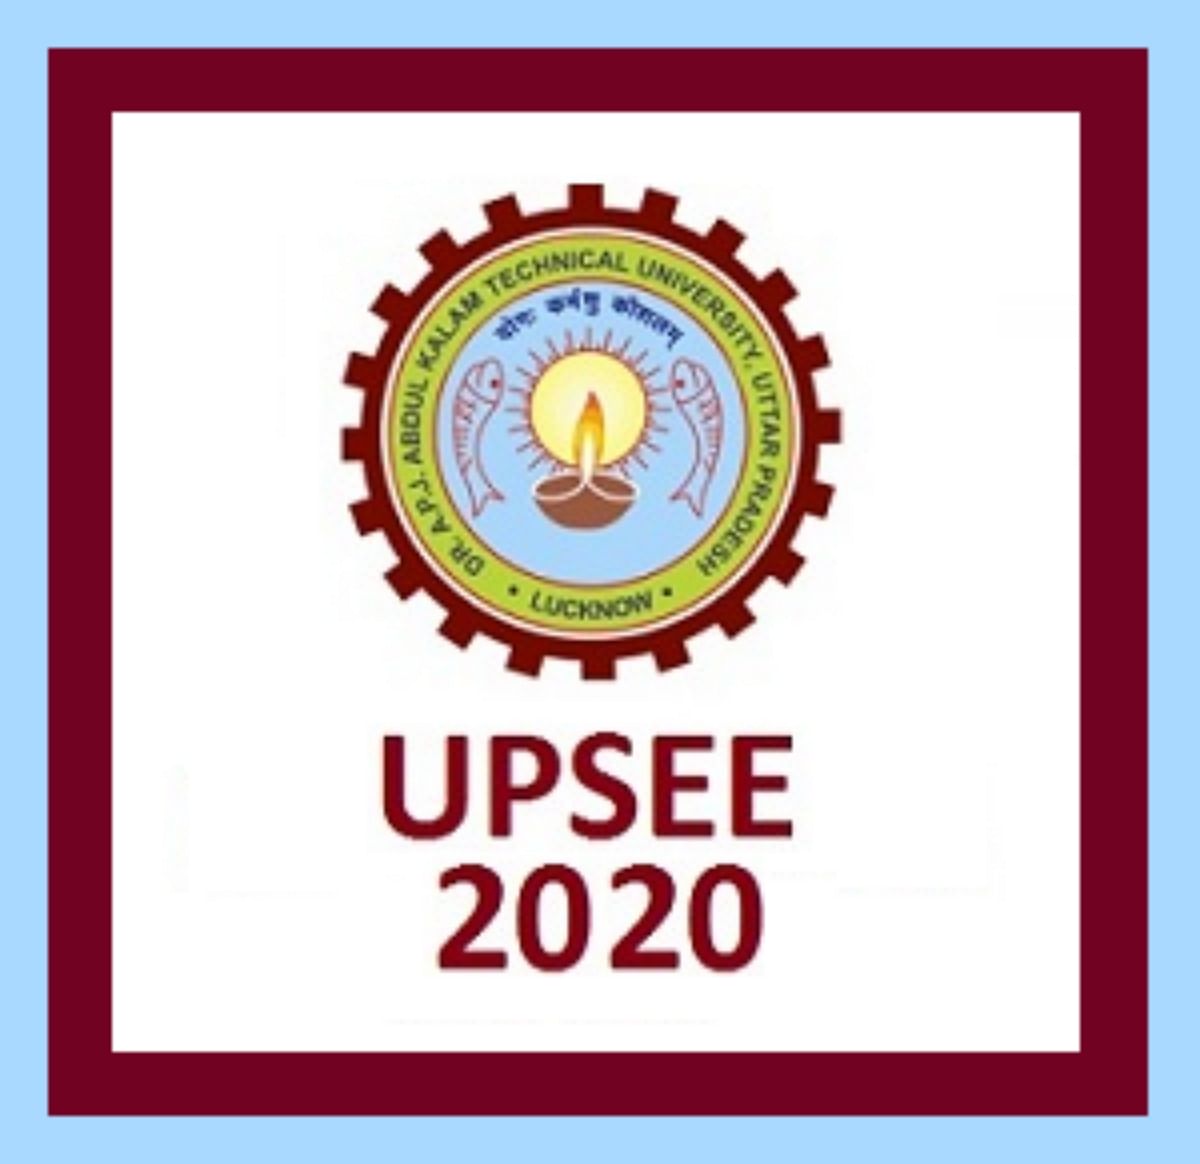 UPSEE 2020: Application Process to Conclude Tomorrow,  Details Here